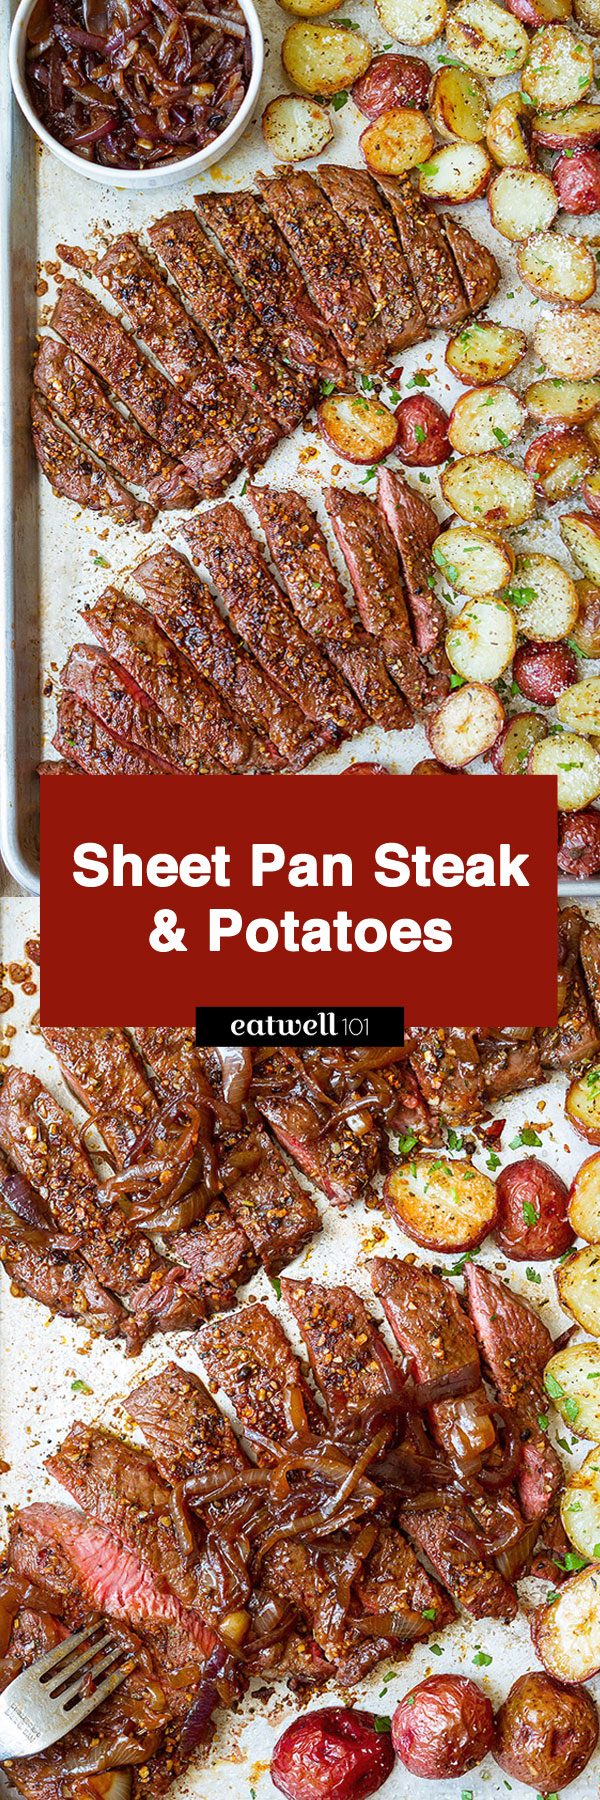 Sheet Pan Steak and Potatoes — #eatwell101 #recipe #steak #dinner - Perfectly seasoned, melt-in-your-mouth tender steak and crisp cheesy potatoes — An easy dinner ready in less than an hour!